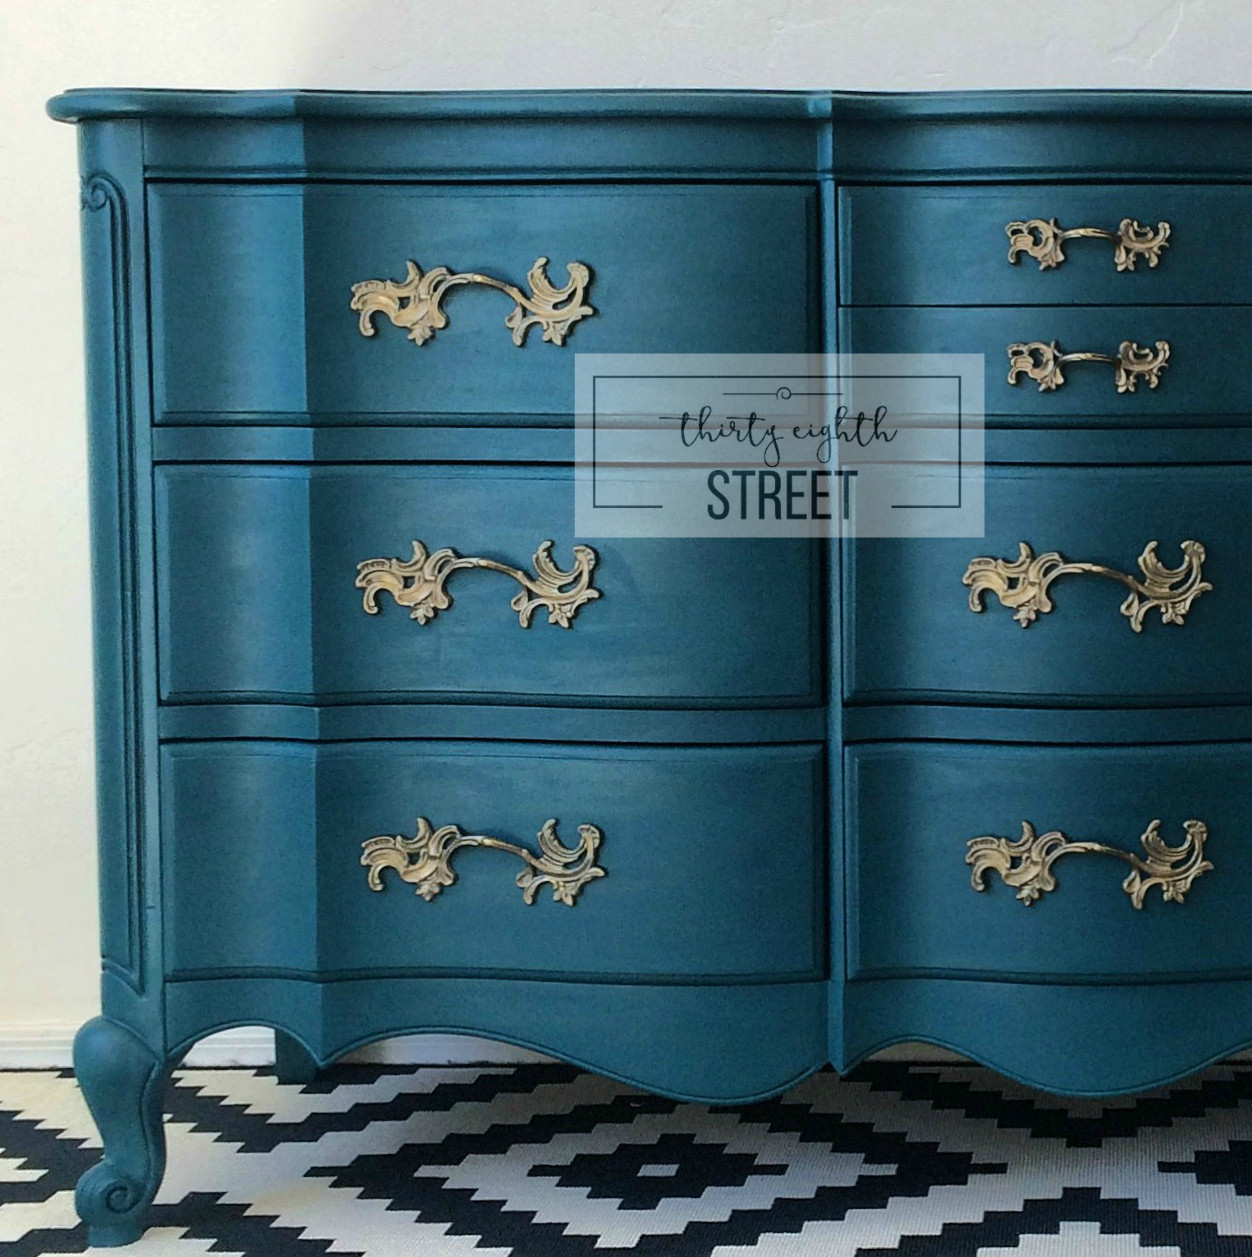 Painted Bedroom Furniture Ideas
 Painted Dresser in Peacock Blue Thirty Eighth Street